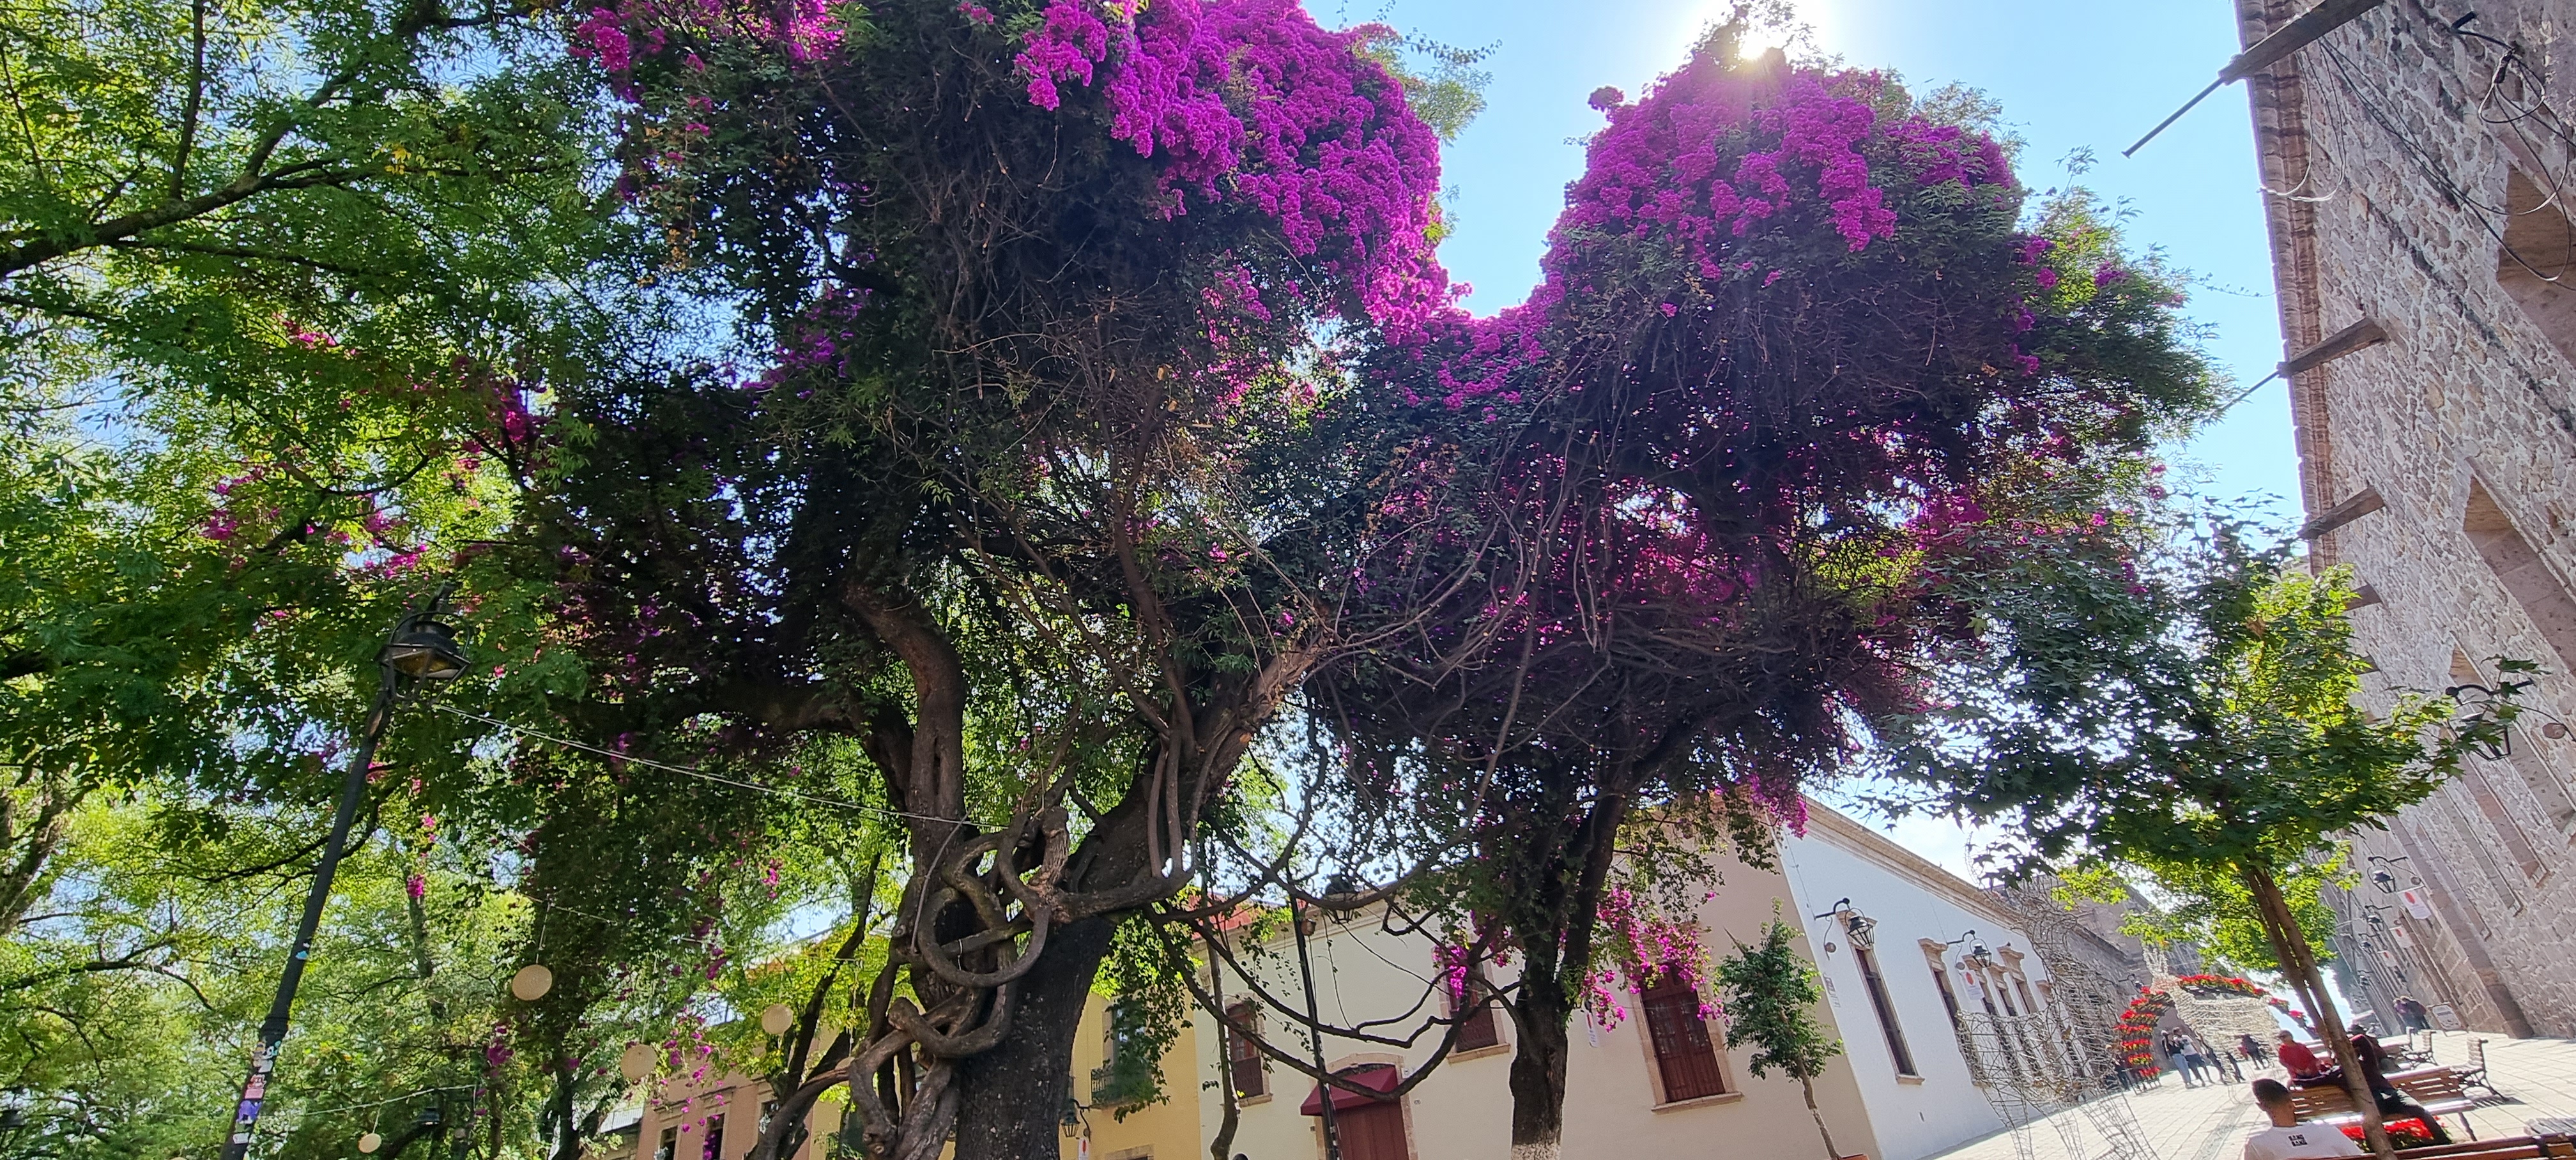 A picture of a bougainvillea tree filled with purple flowers in a very traditional street in Morelia, Michoacan.